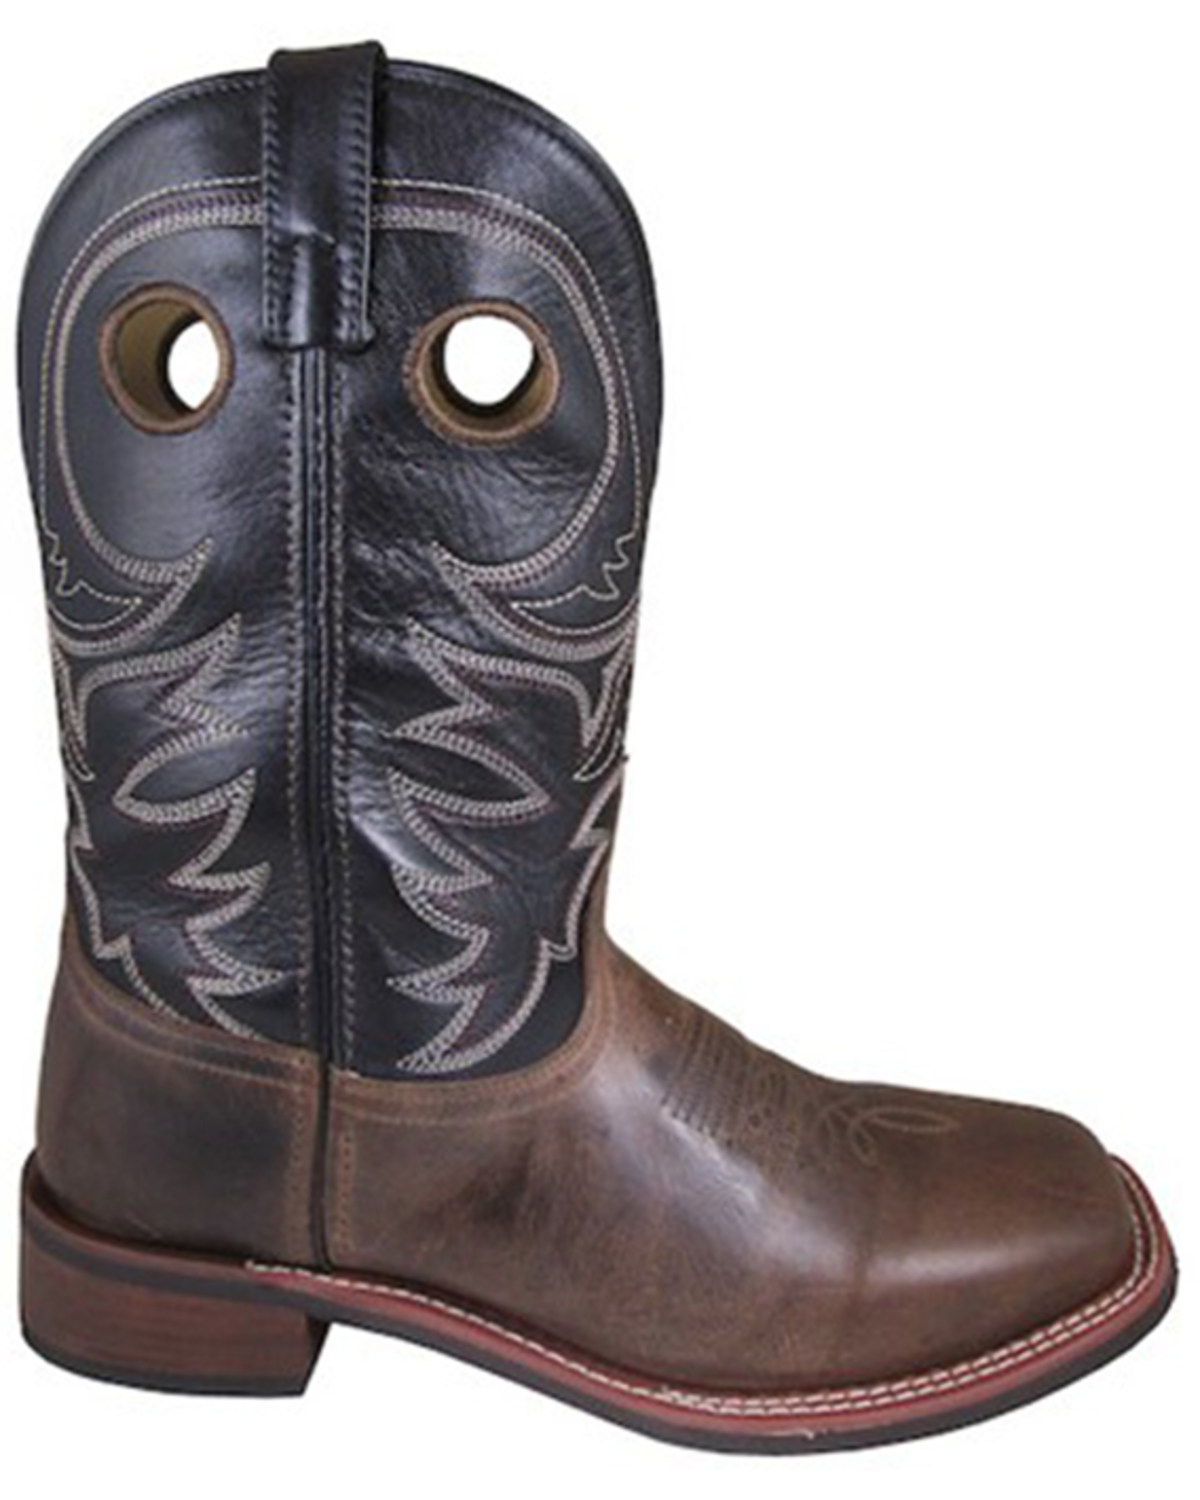 Smoky Mountain Men's Hudson Western Boots - Broad Square Toe